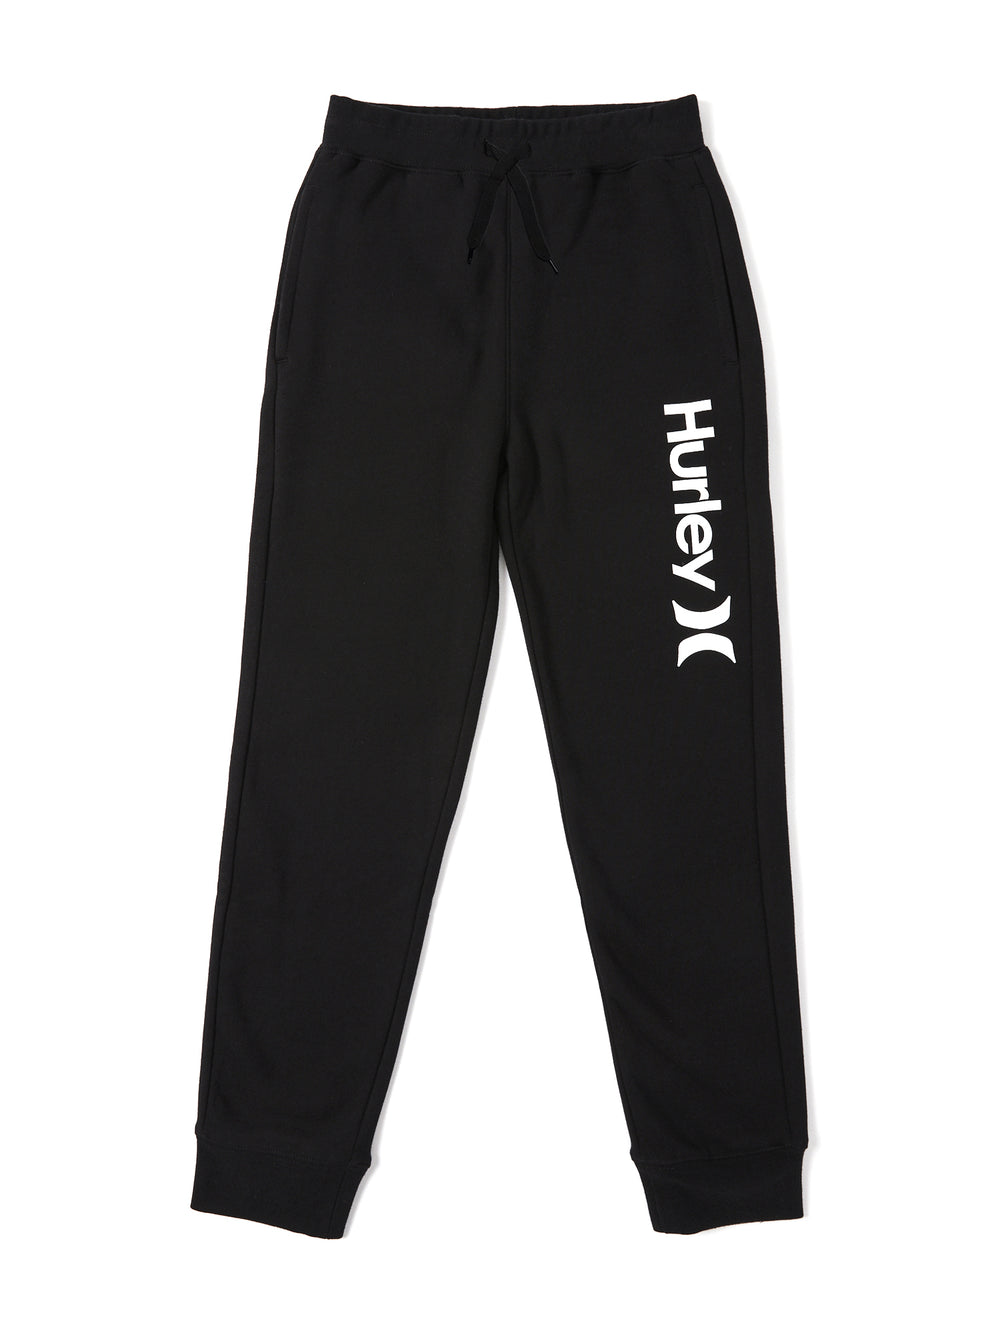 KIDS HURLEY YOUTH BOYS ONE & ONLY FLEECE PANTS - CLEARANCE